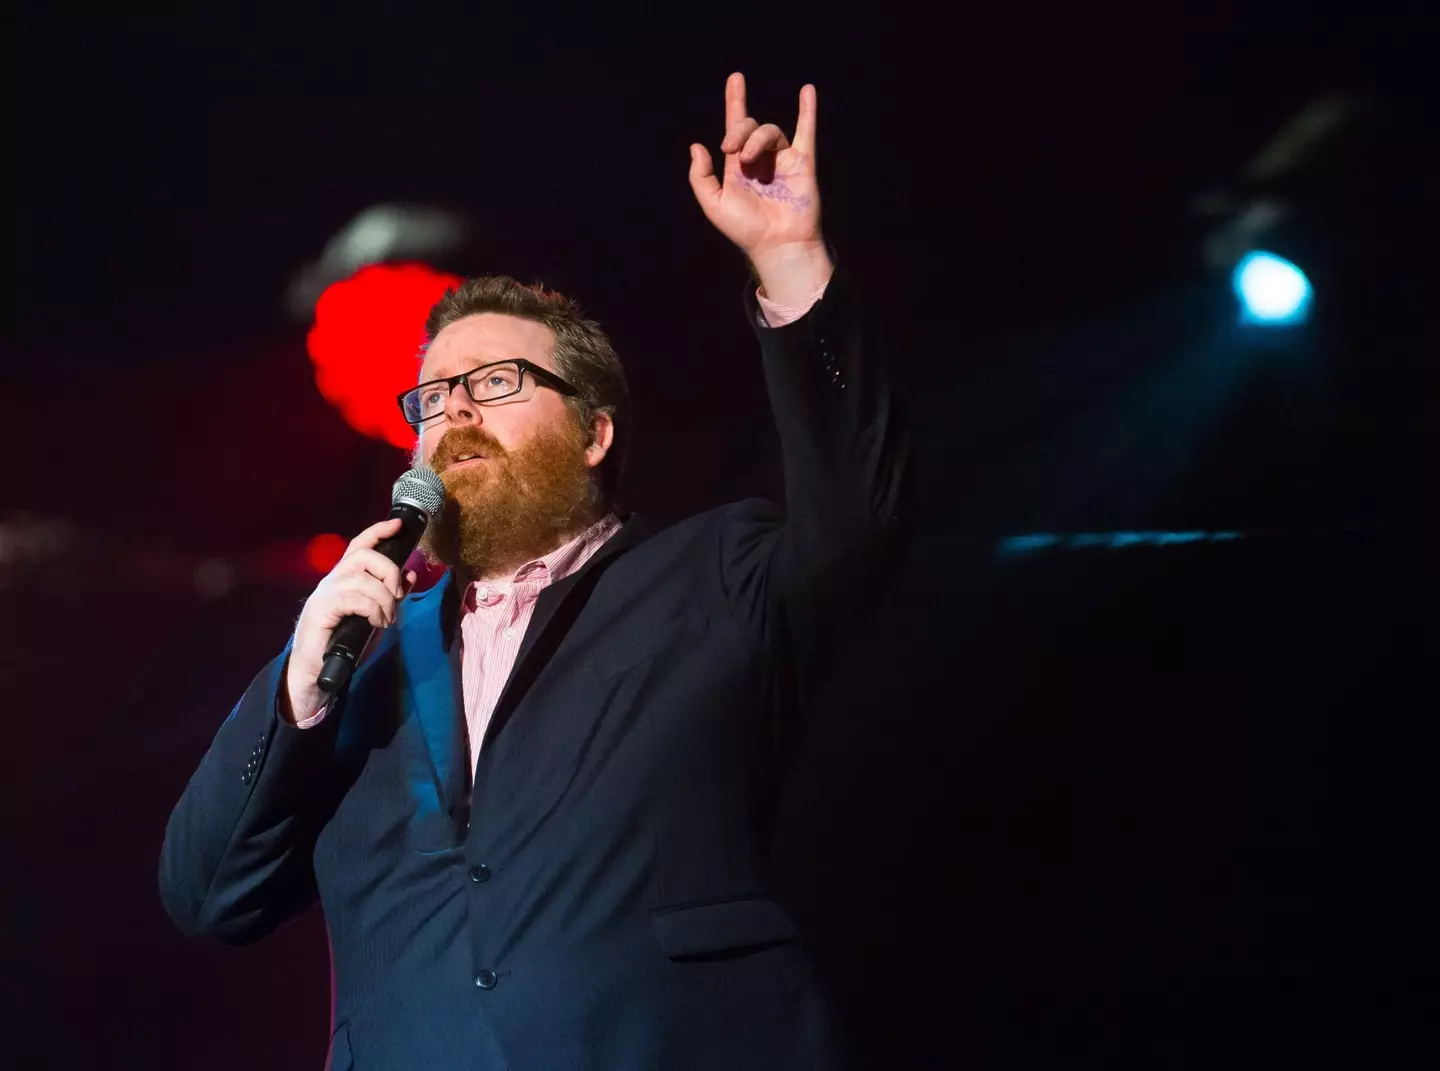 Frankie Boyle has claimed audiences would 'struggle to be offended' by his real routine.